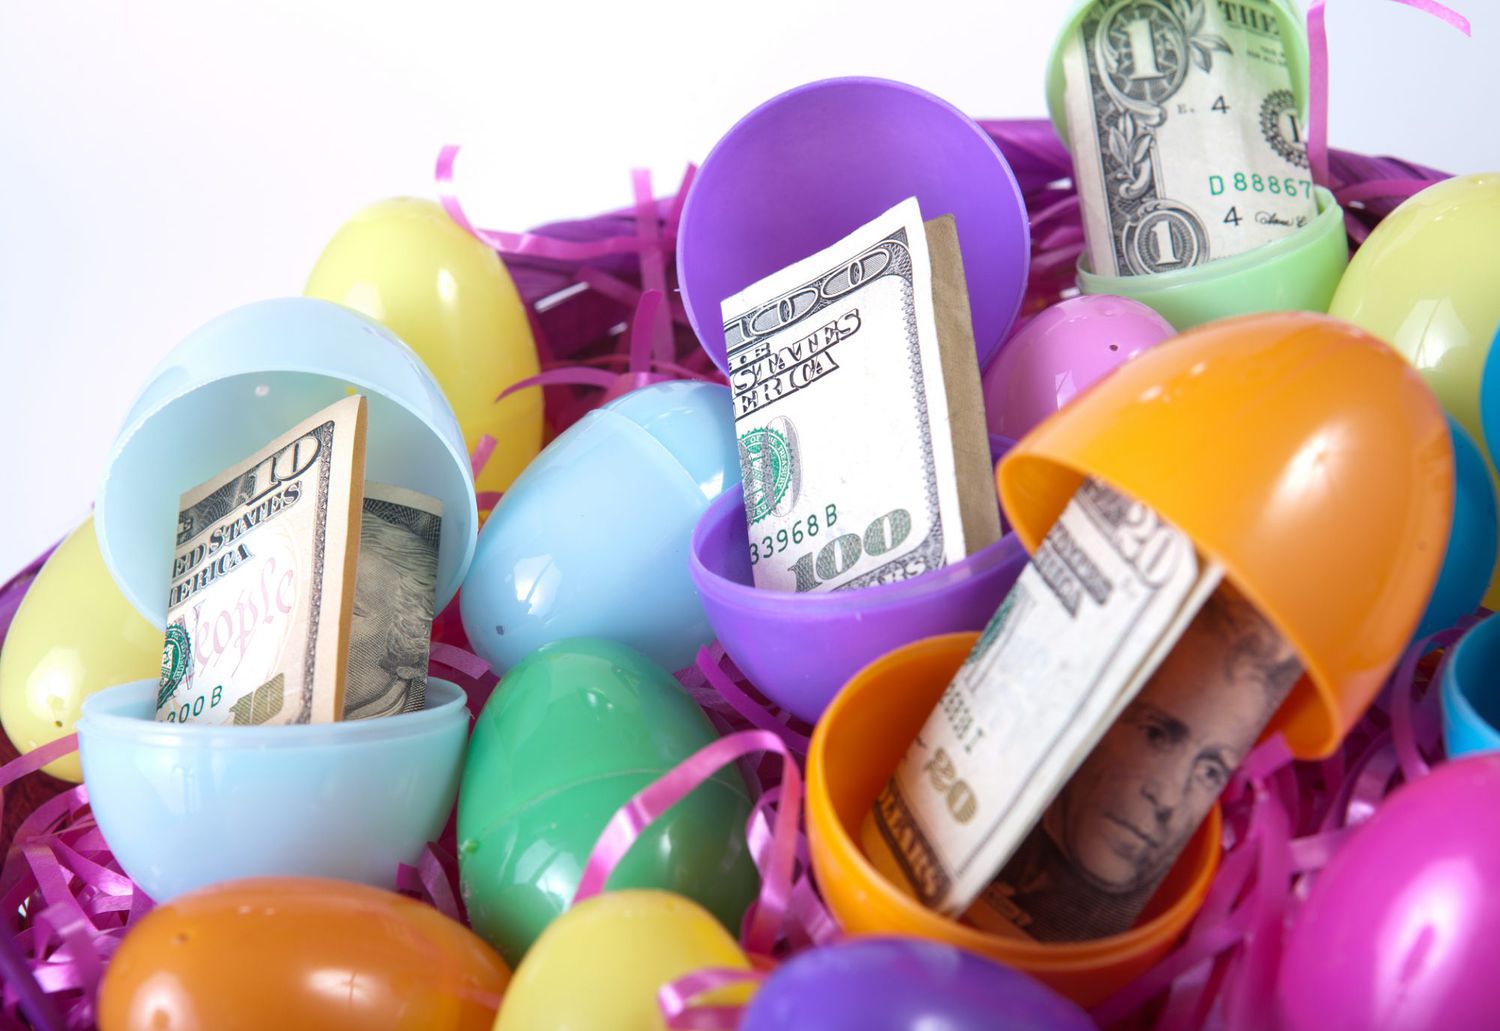 Americans Spend a Lot More on Easter Candy Than You Might Think | Allrecipes